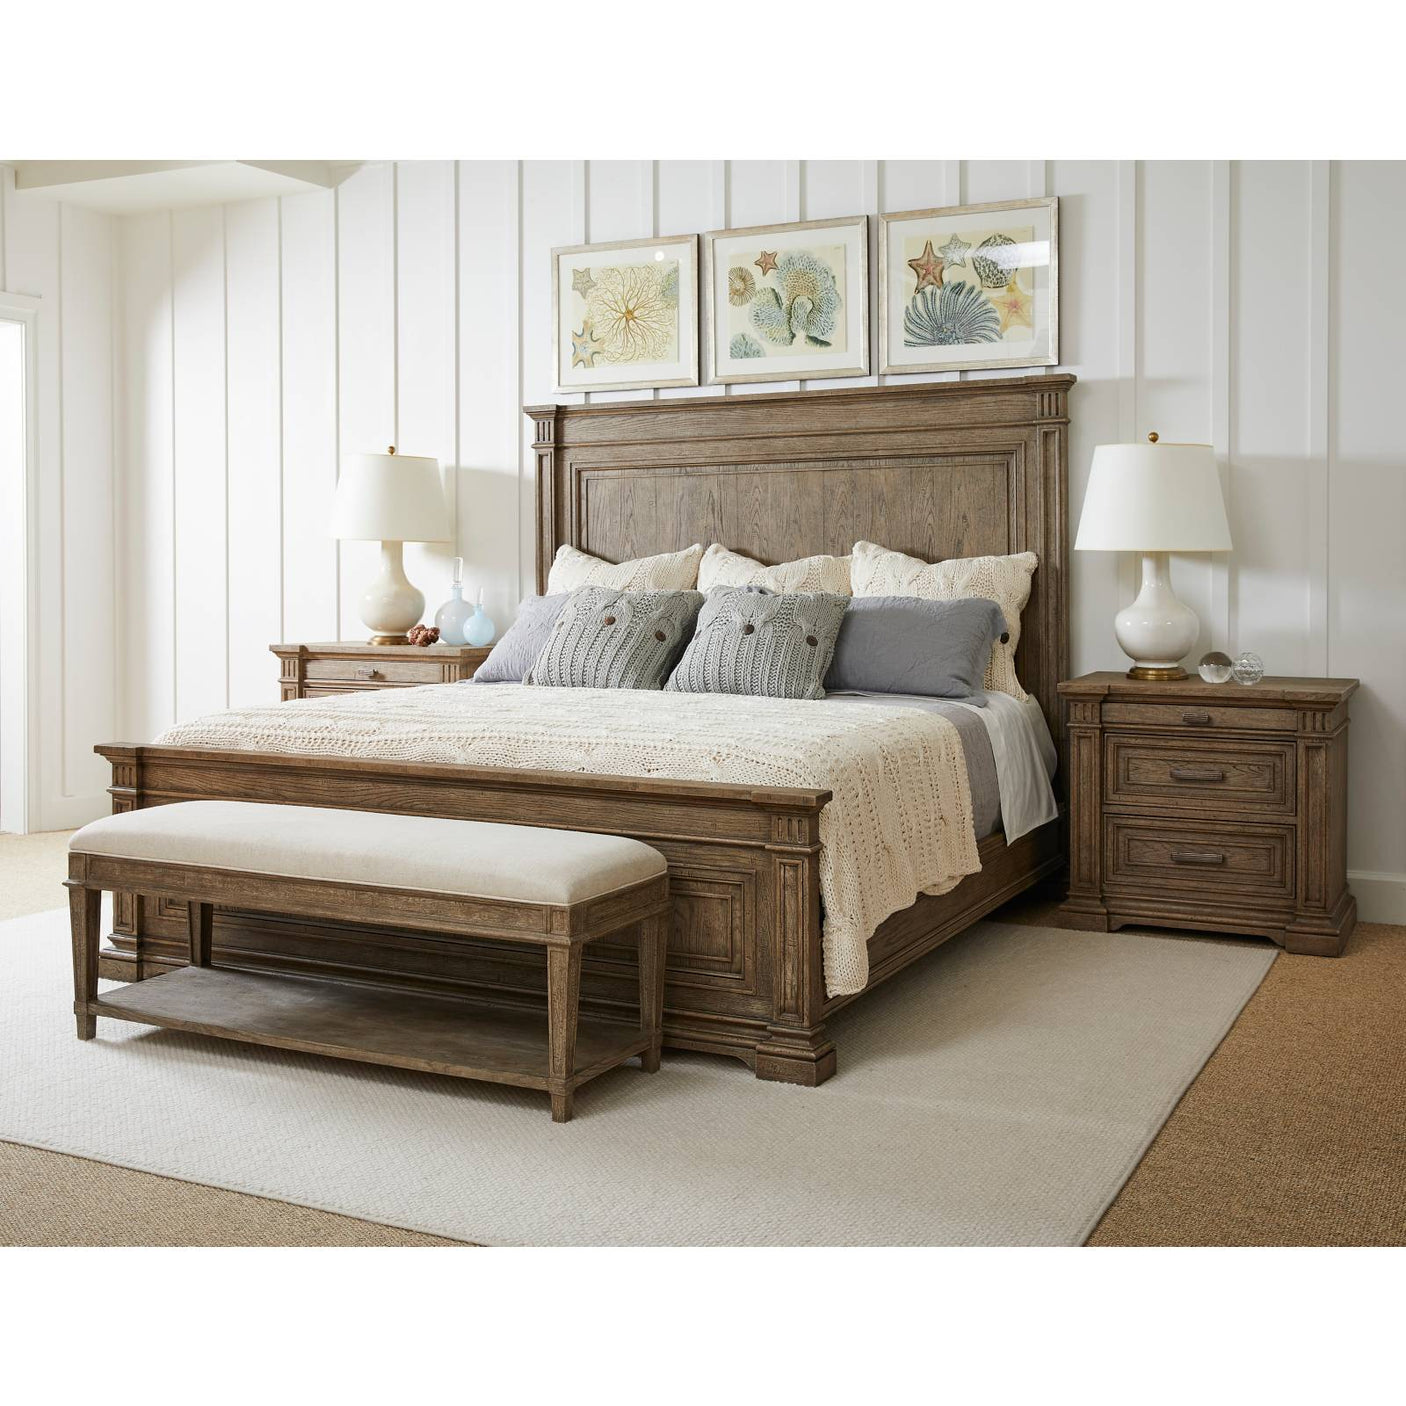 wooden chest for end of bed